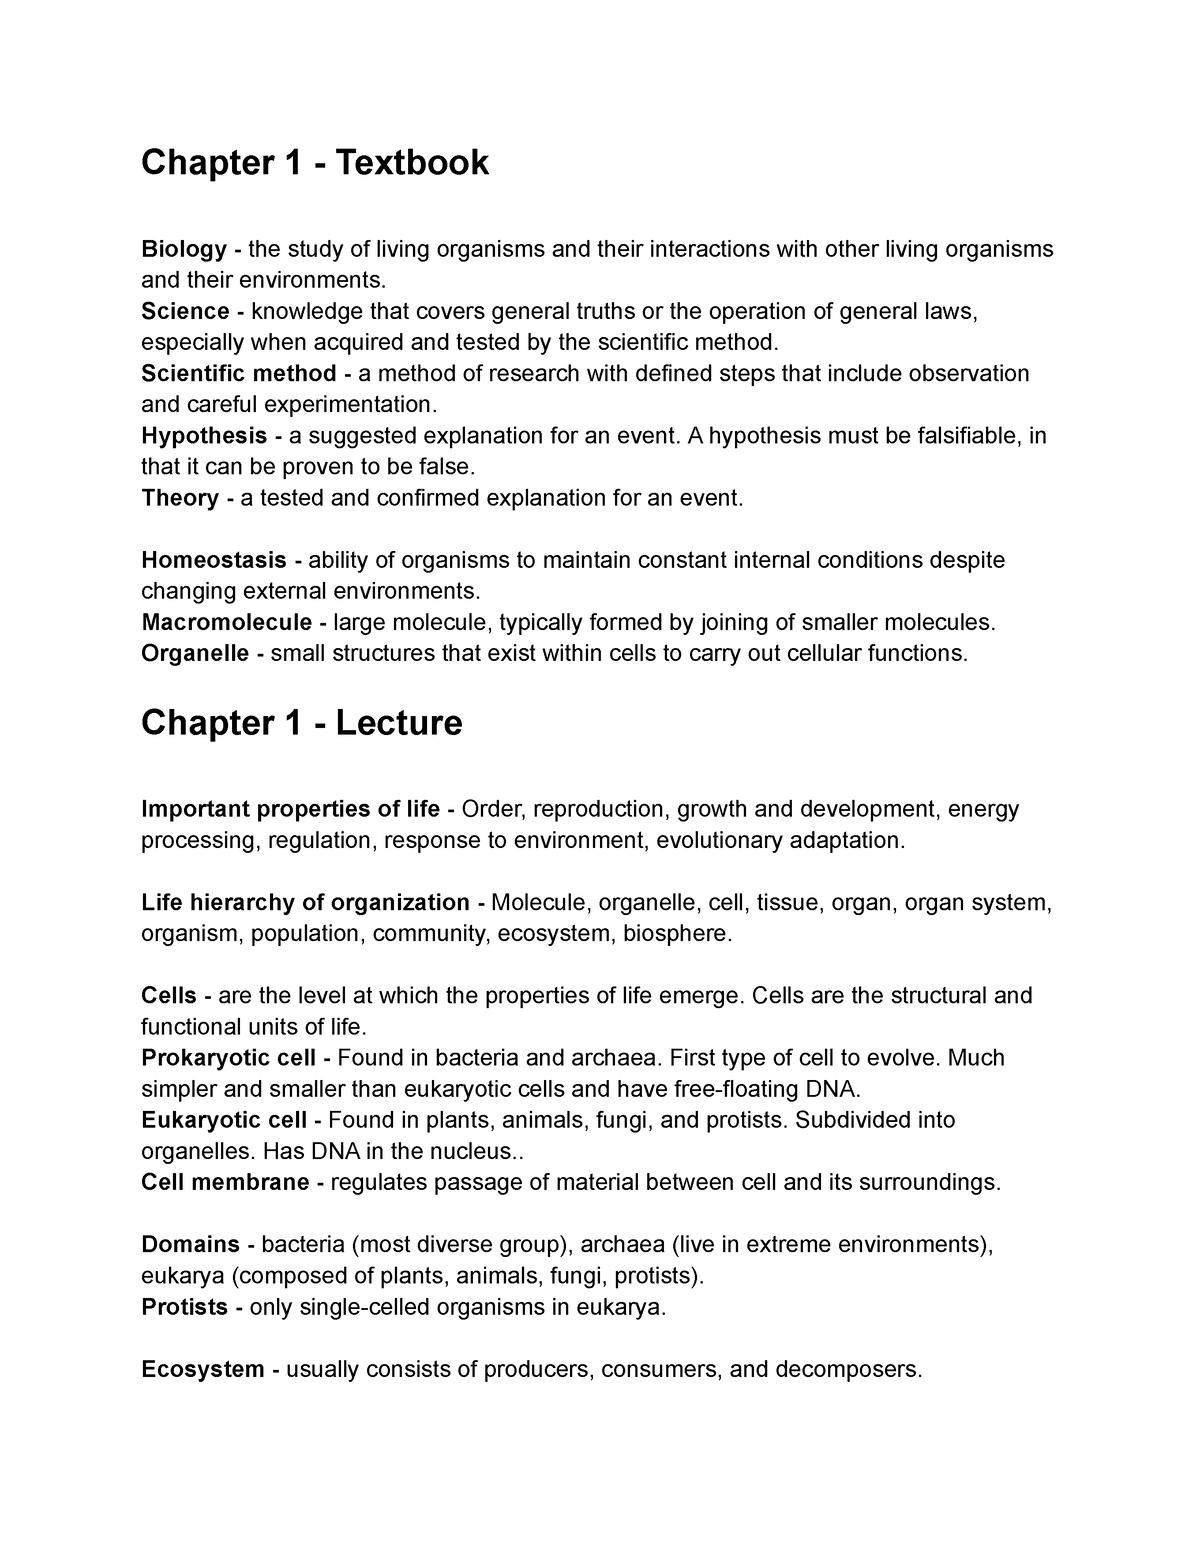 Bio 106 - Review - Chapter 1 - Textbook Biology - the study of living ...